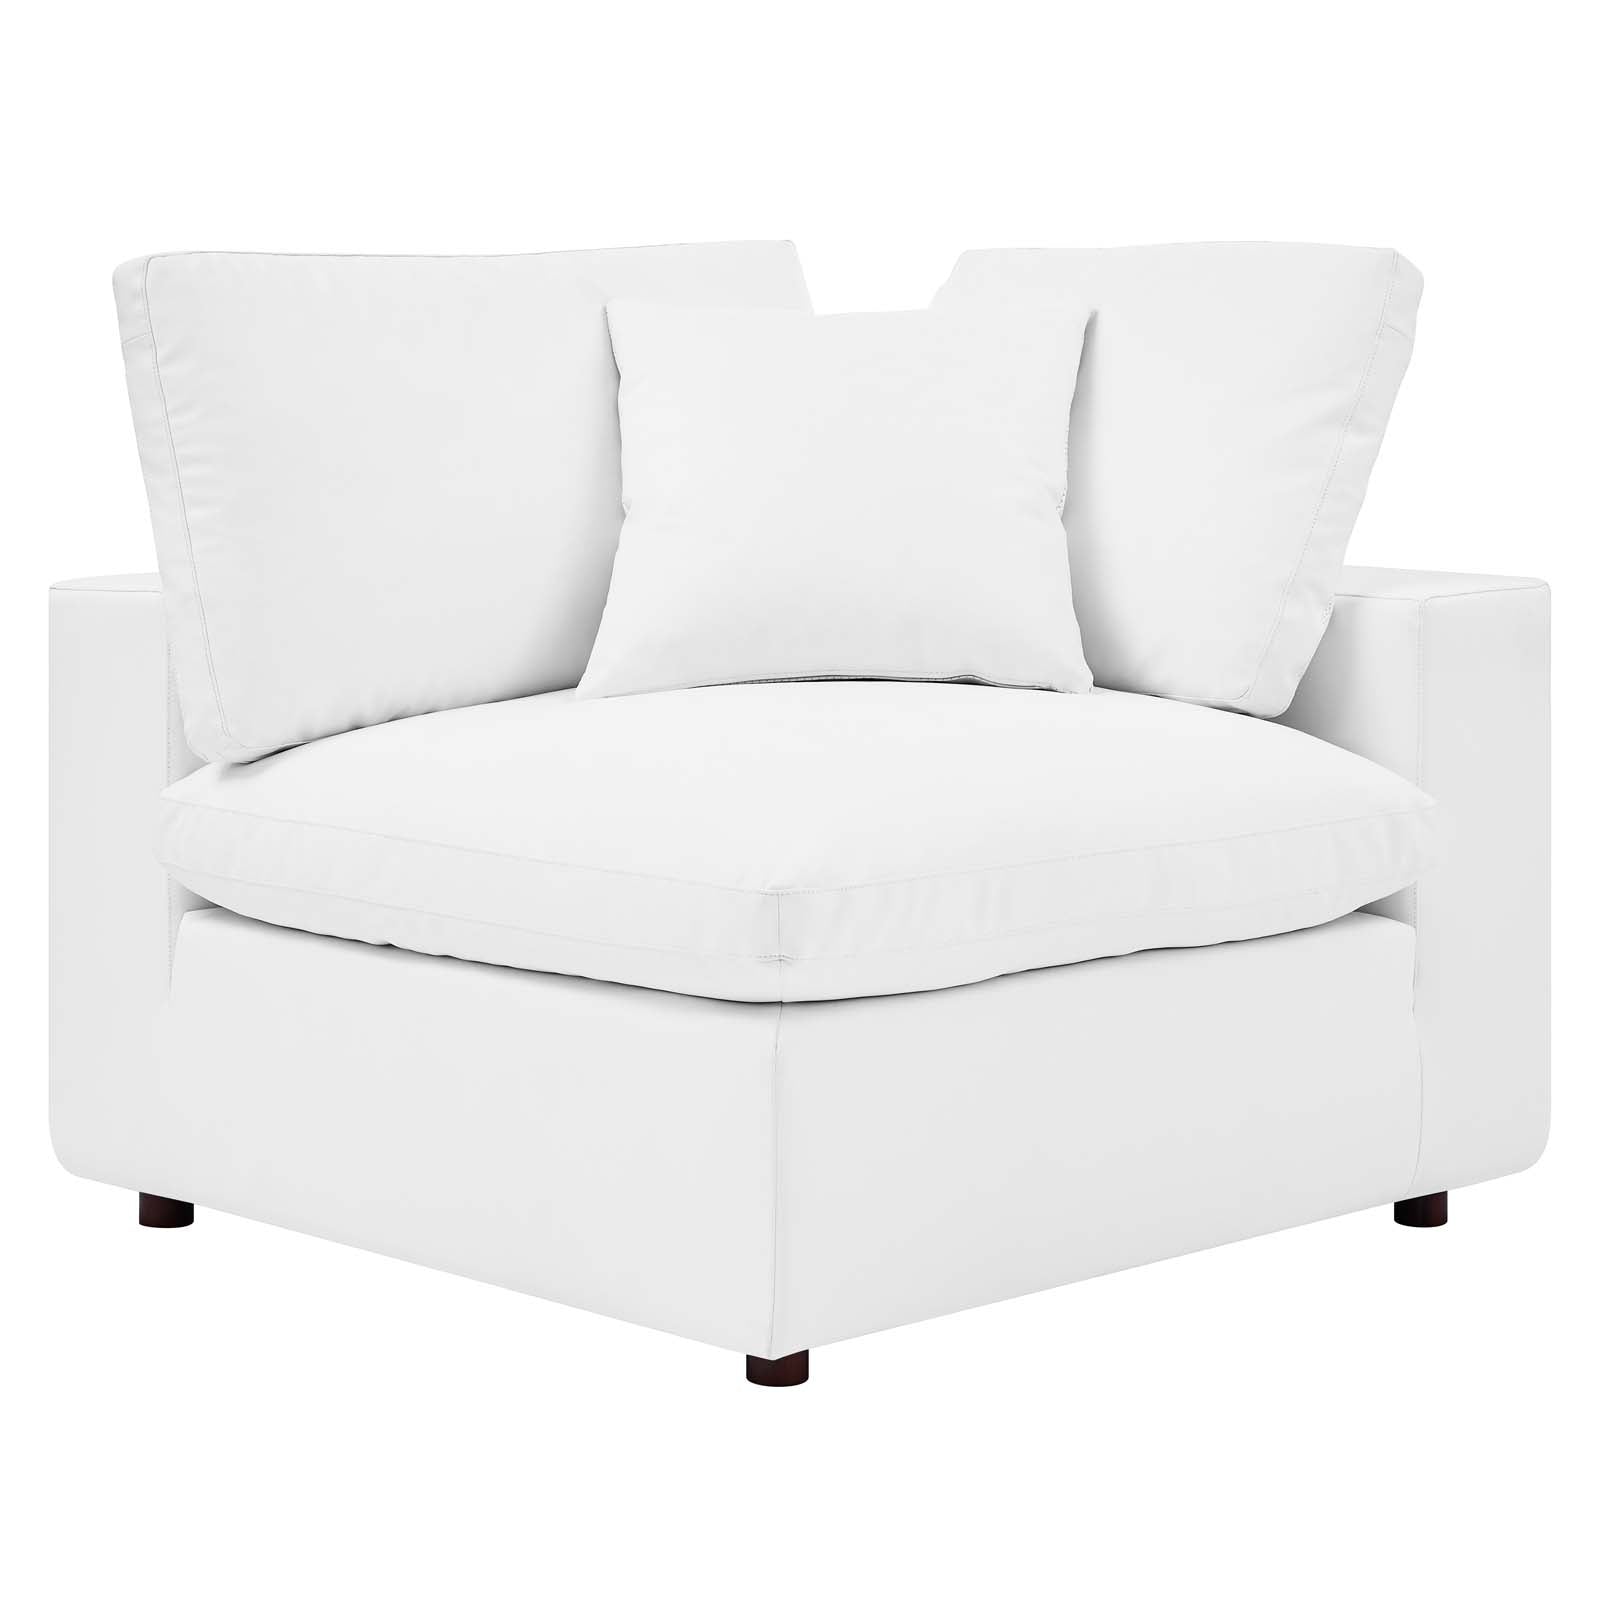 Modway Sectional Sofas - Commix Down Filled Overstuffed Vegan Leather 8 Piece Sectional Sofa White